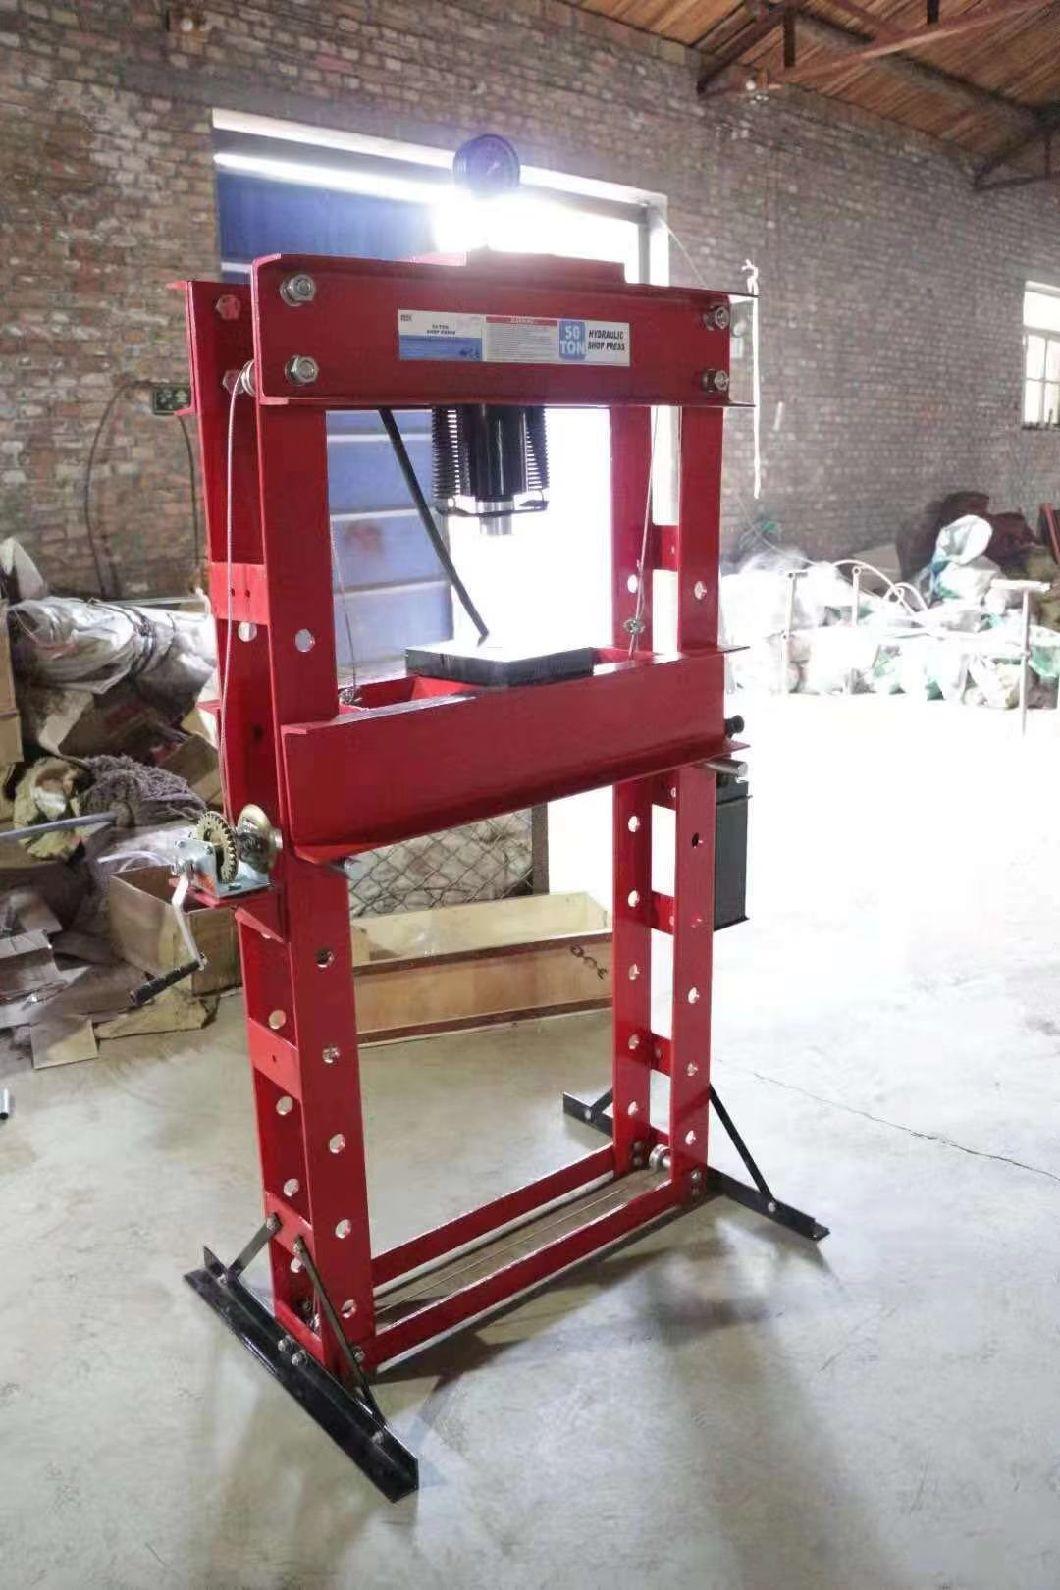 50ton Vehicle Equipment 20t Hydraulic Shop Press with Car Bottle Jack